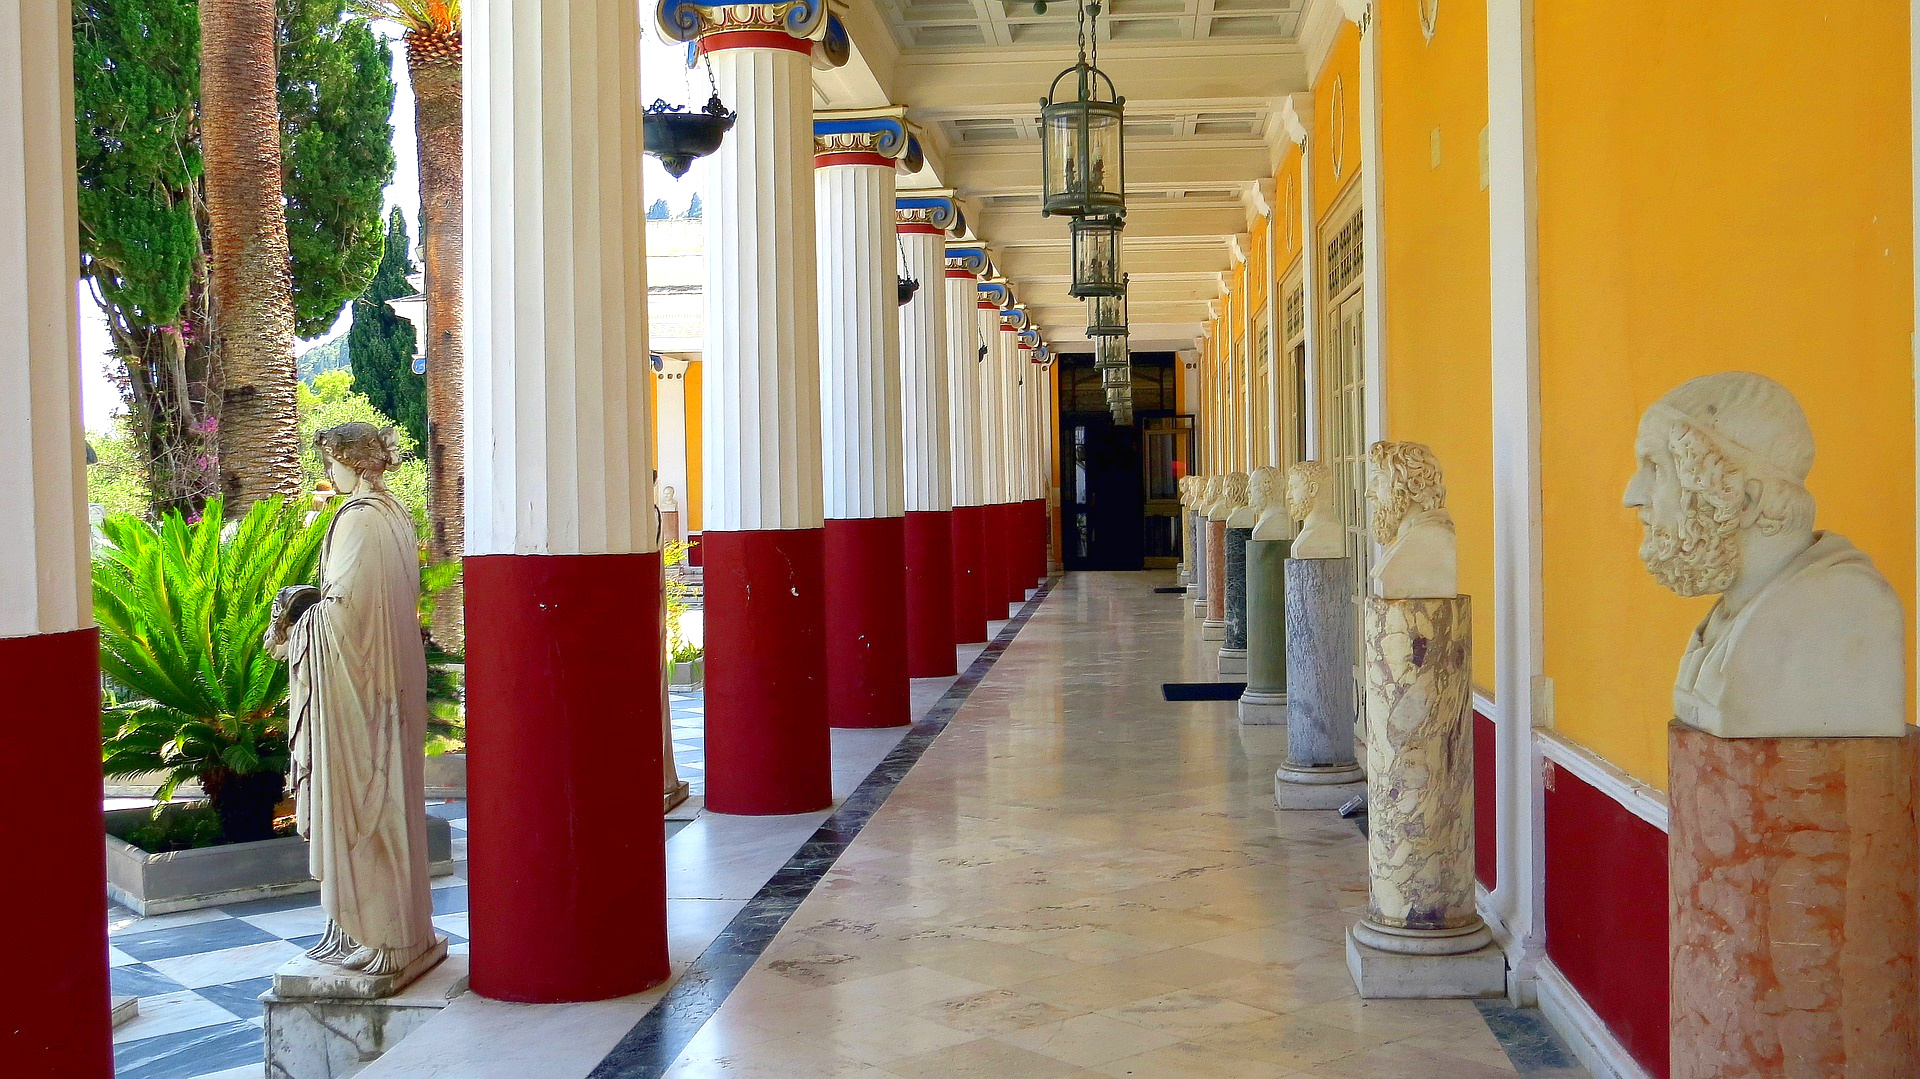 Red and yellow walls of palace. Busts land columns line the outdoor hallway.